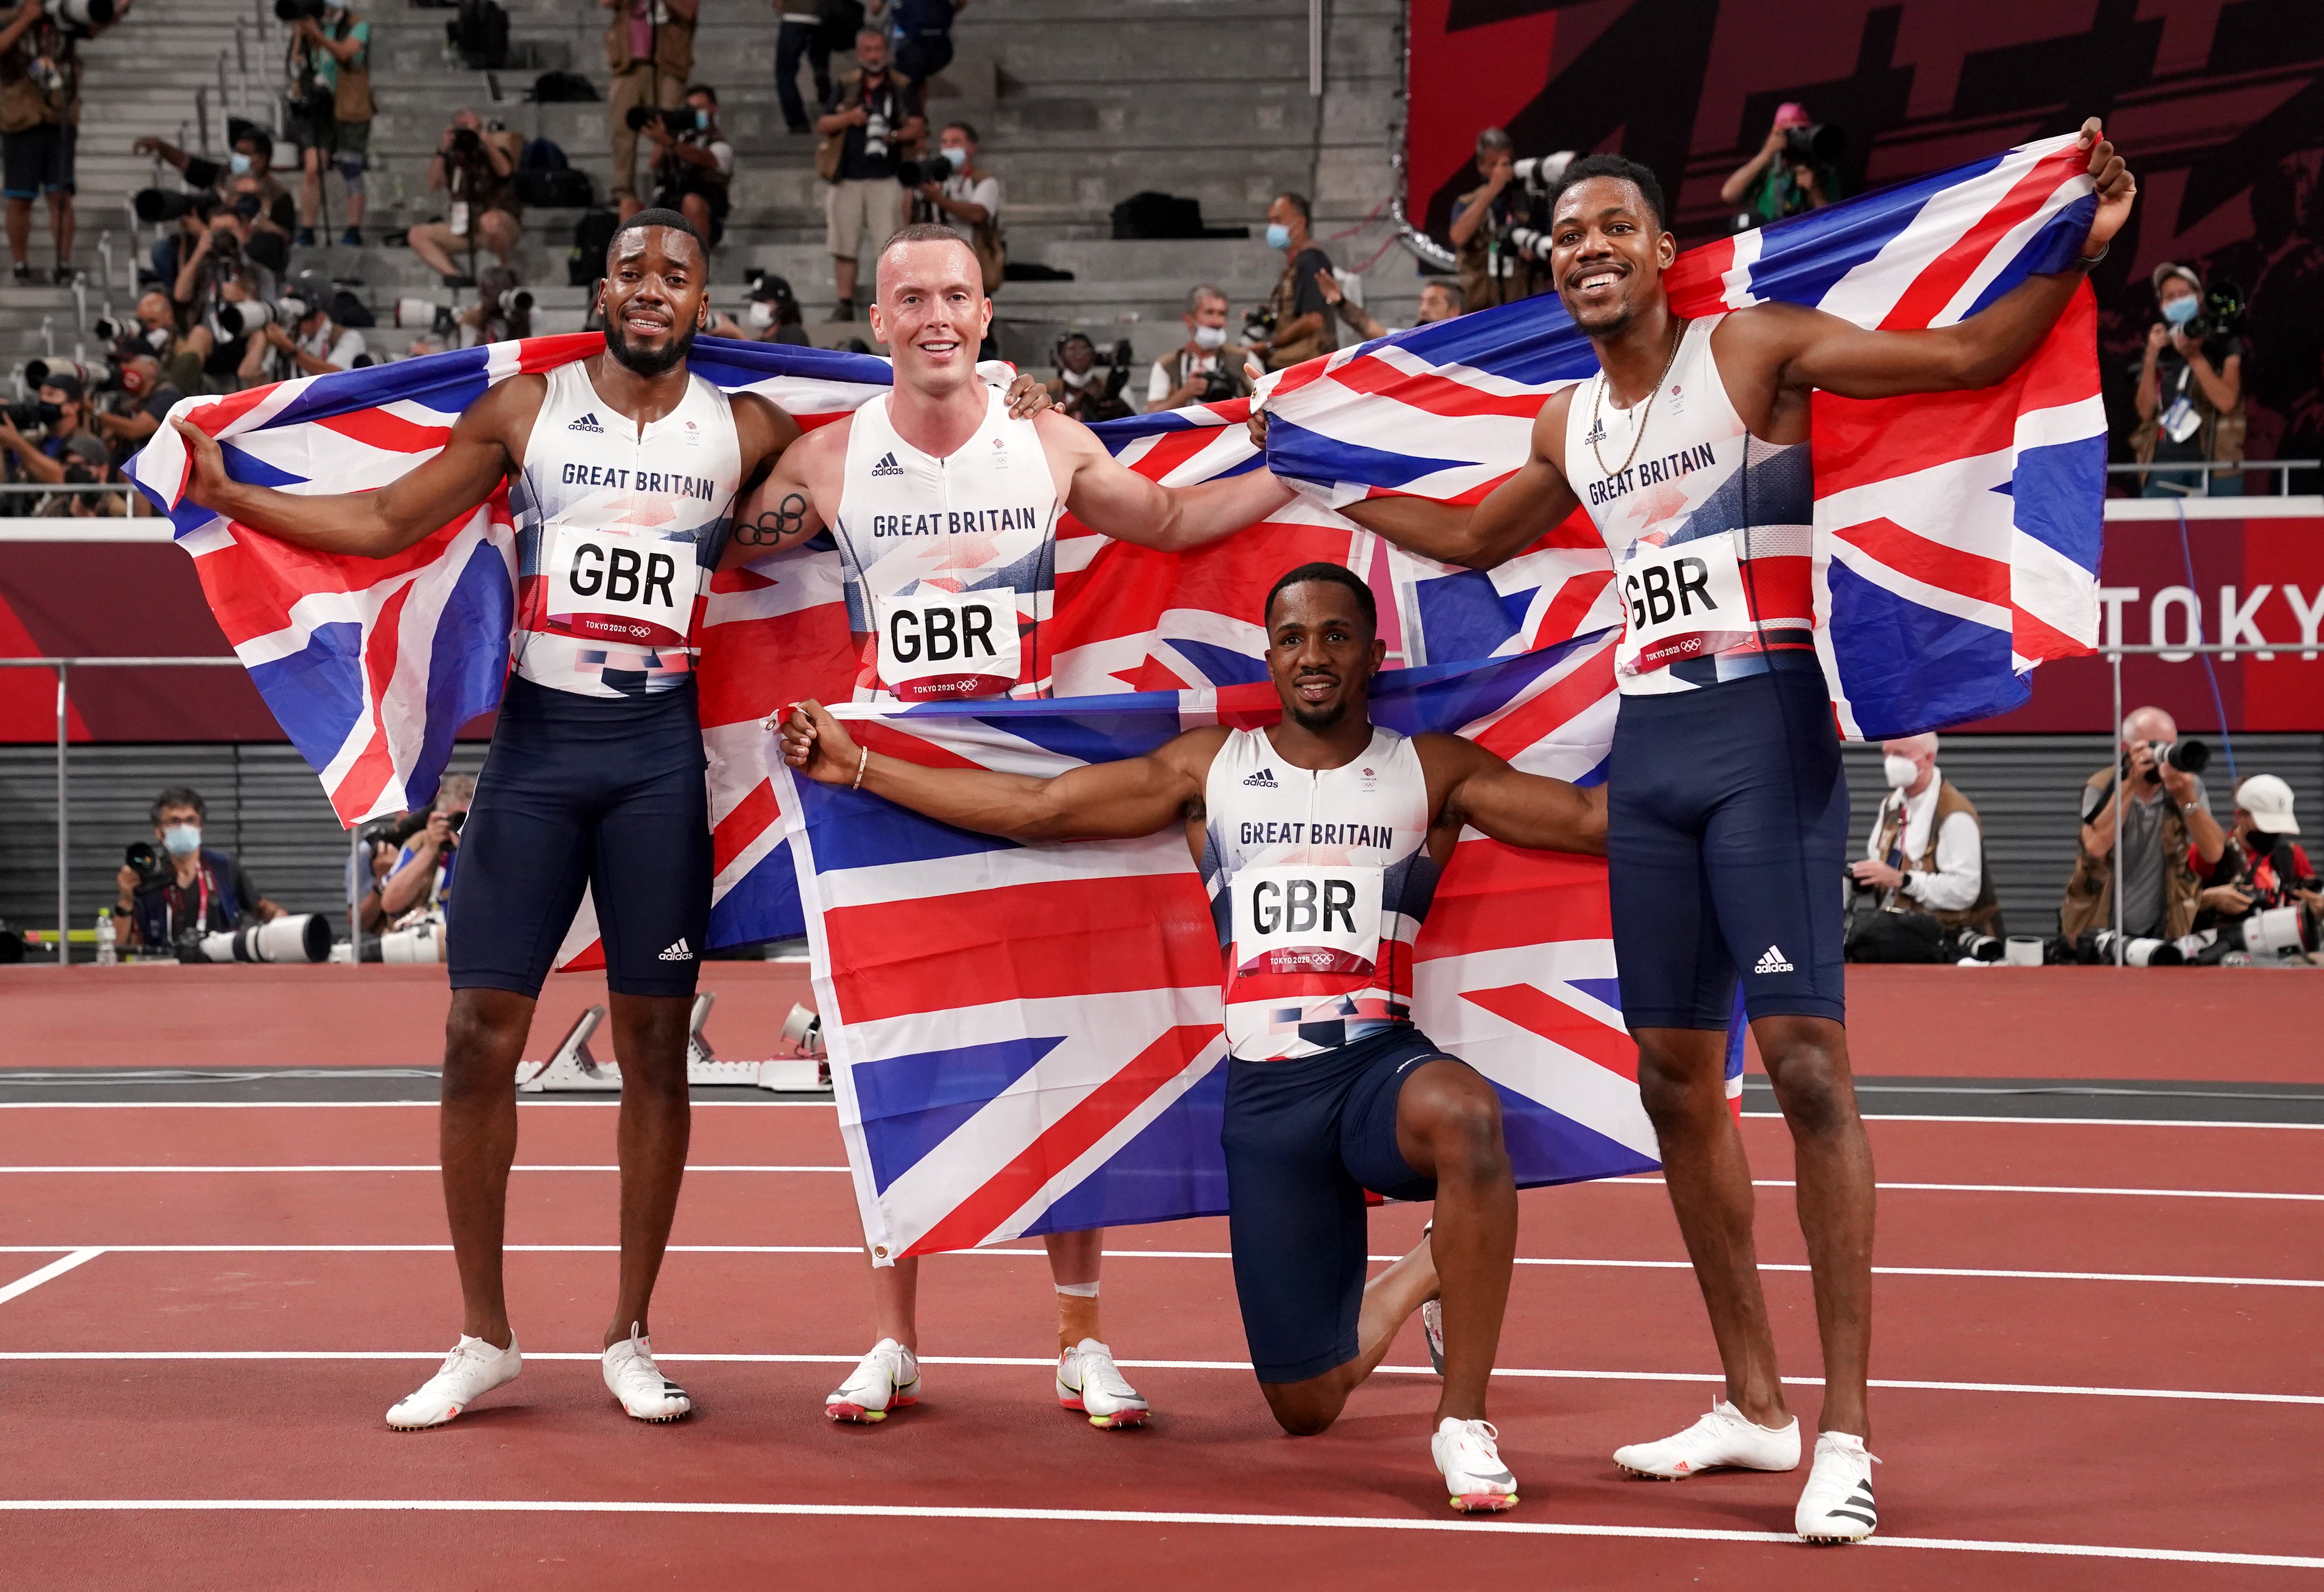 Left to right, Great Britain’s Nethaneel Mitchell-Blake, Richard Kilty, CJ Ujah and Zharnel Hughes after winning silver in the men’s 4 x 100m relay.